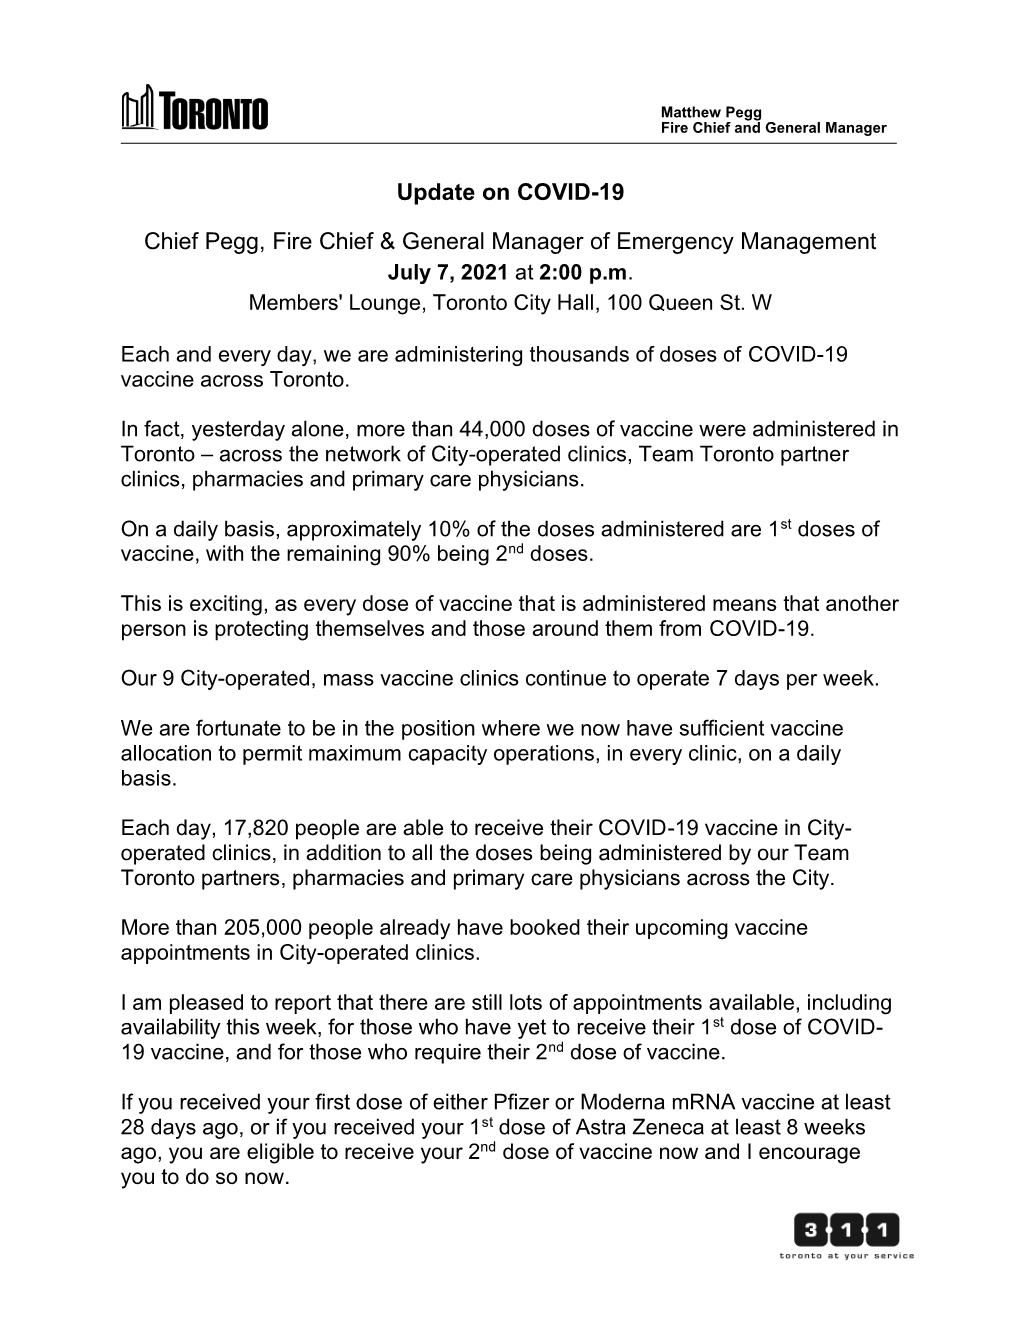 Chief Pegg, Fire Chief Update on COVID-19 July 7, 2021